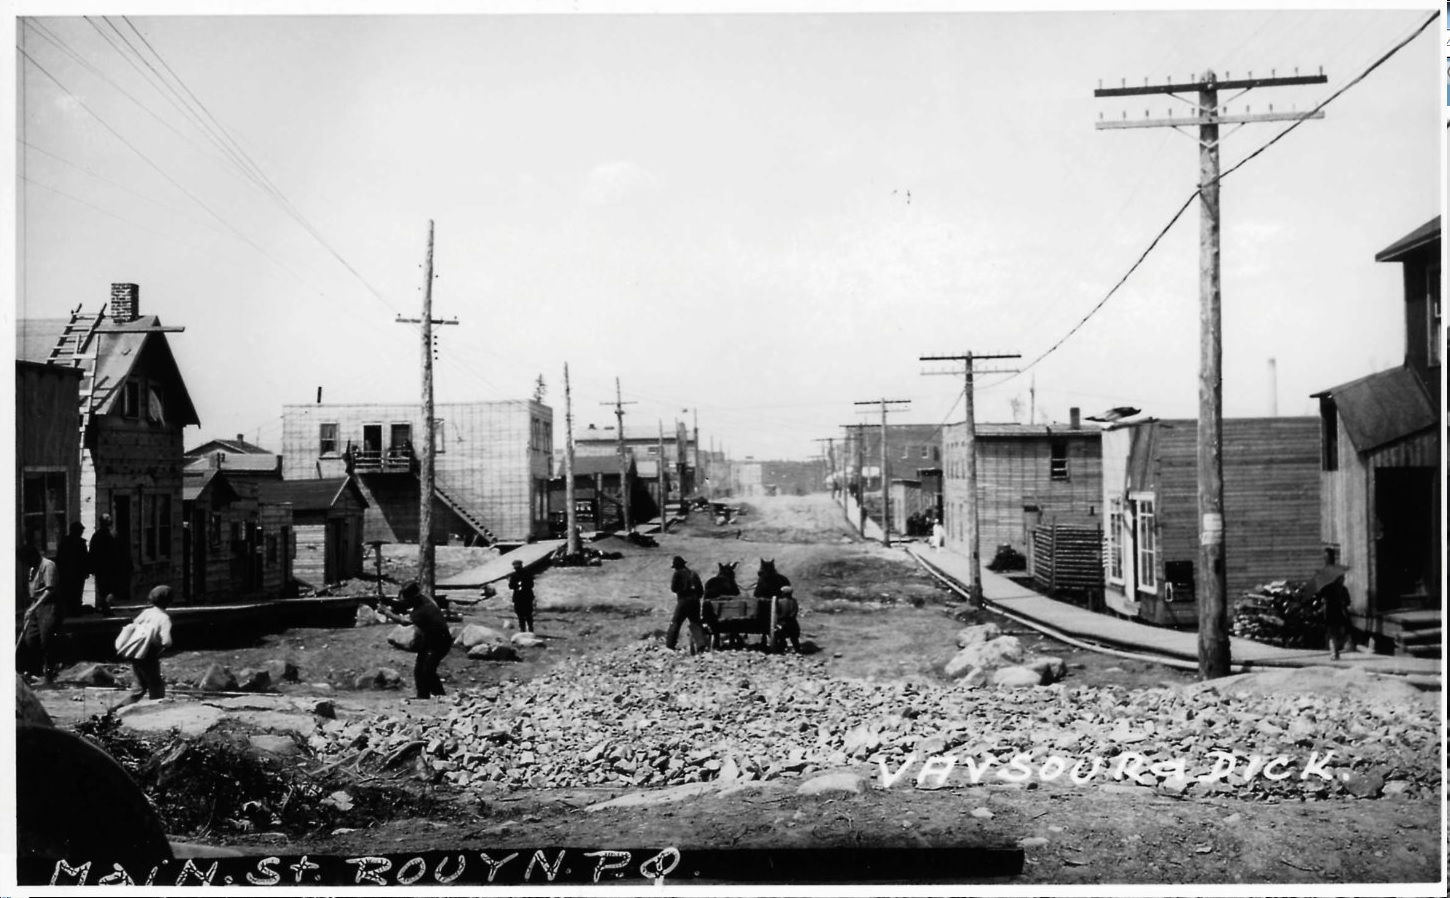 Black and white photograph of a street lined with rudimentary buildings and electricity poles. Six men and two horses work on paving. Boardwalks line the street.